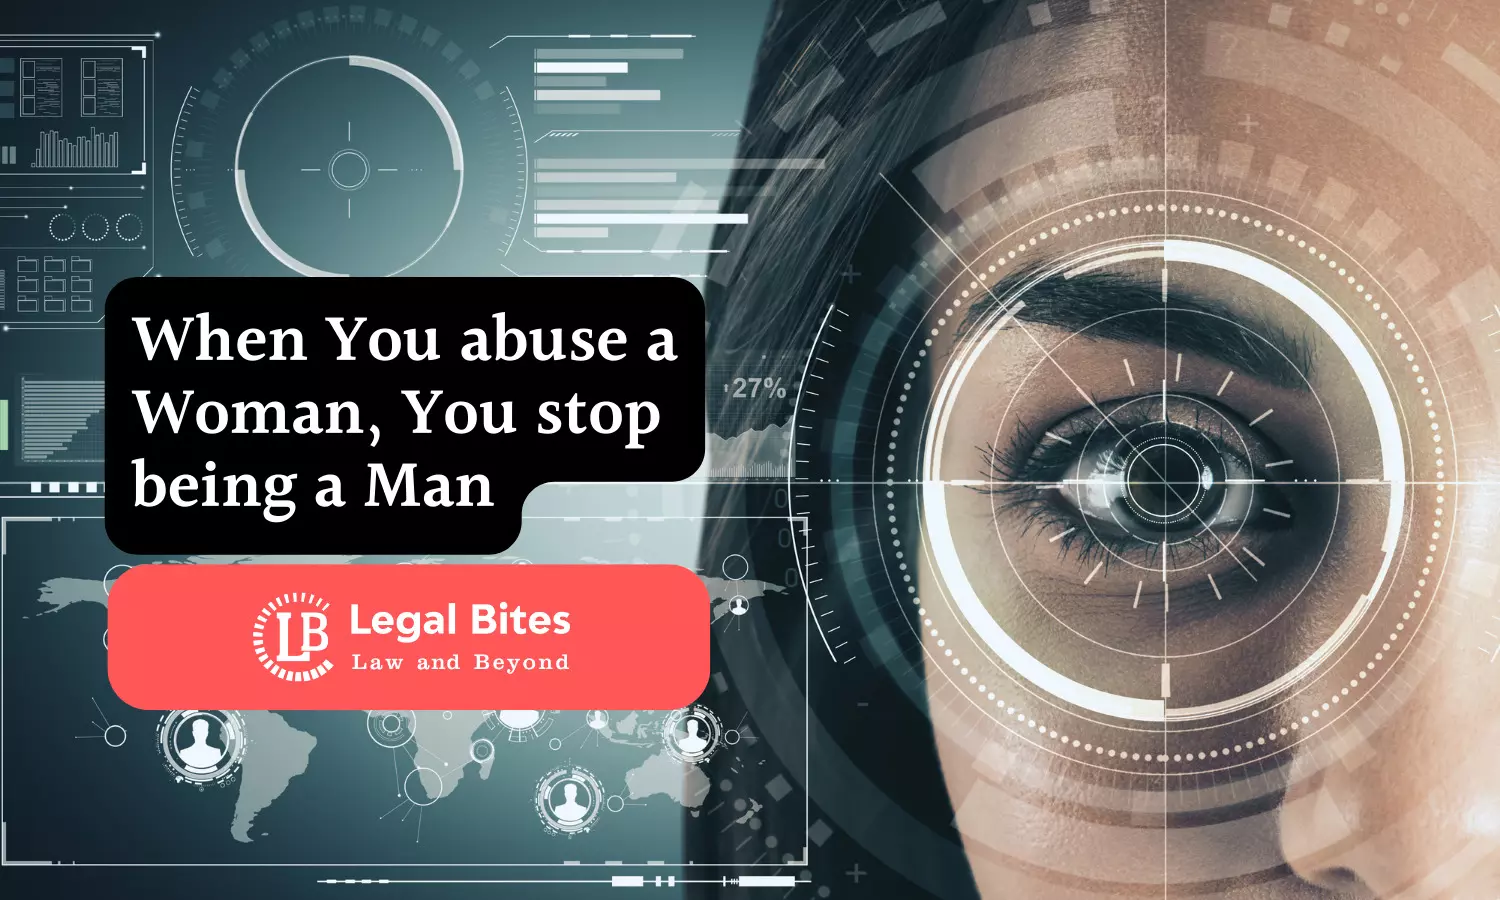 When You abuse a Woman, You stop being a Man | Women and Cybercrimes